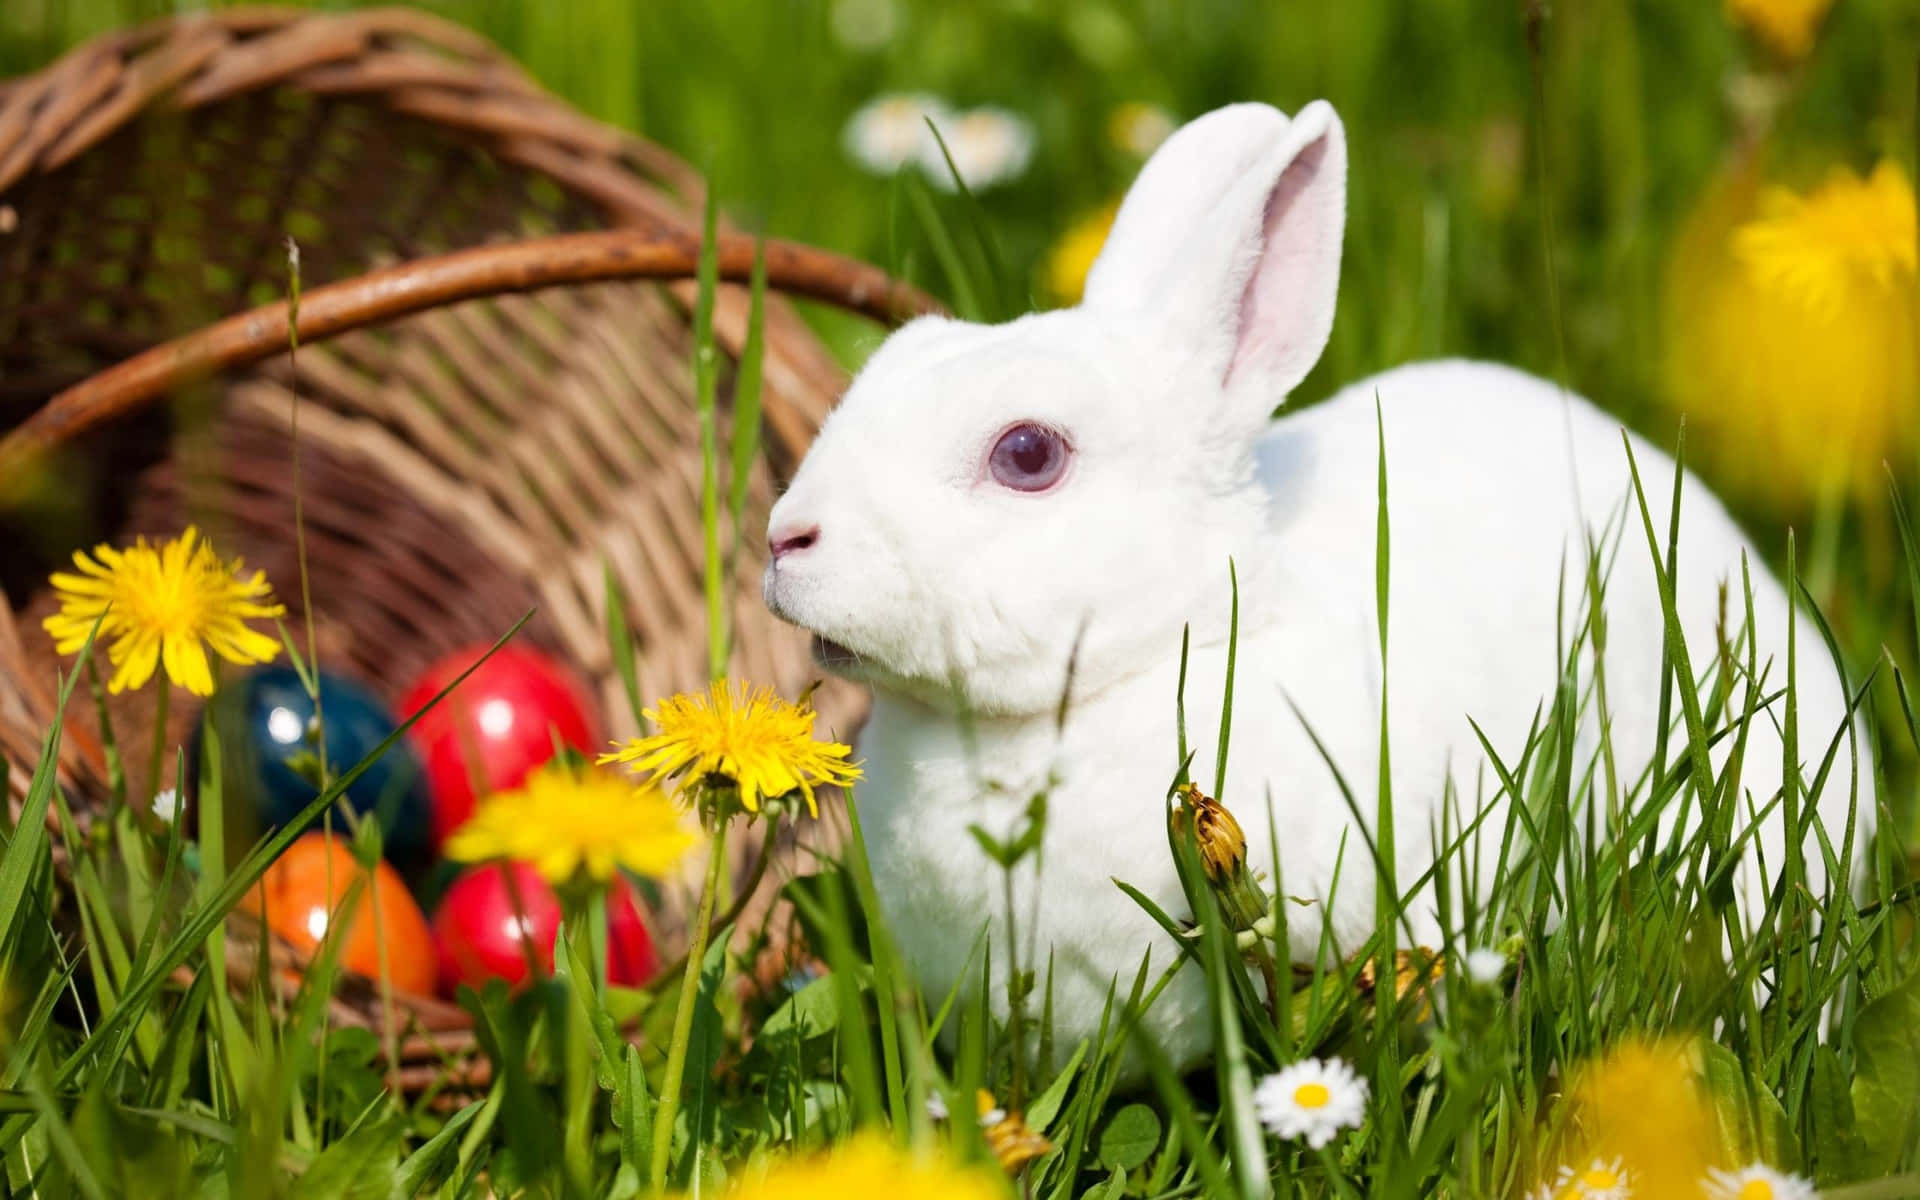 A cute, white bunny perches atop a brown log in a vibrant meadow